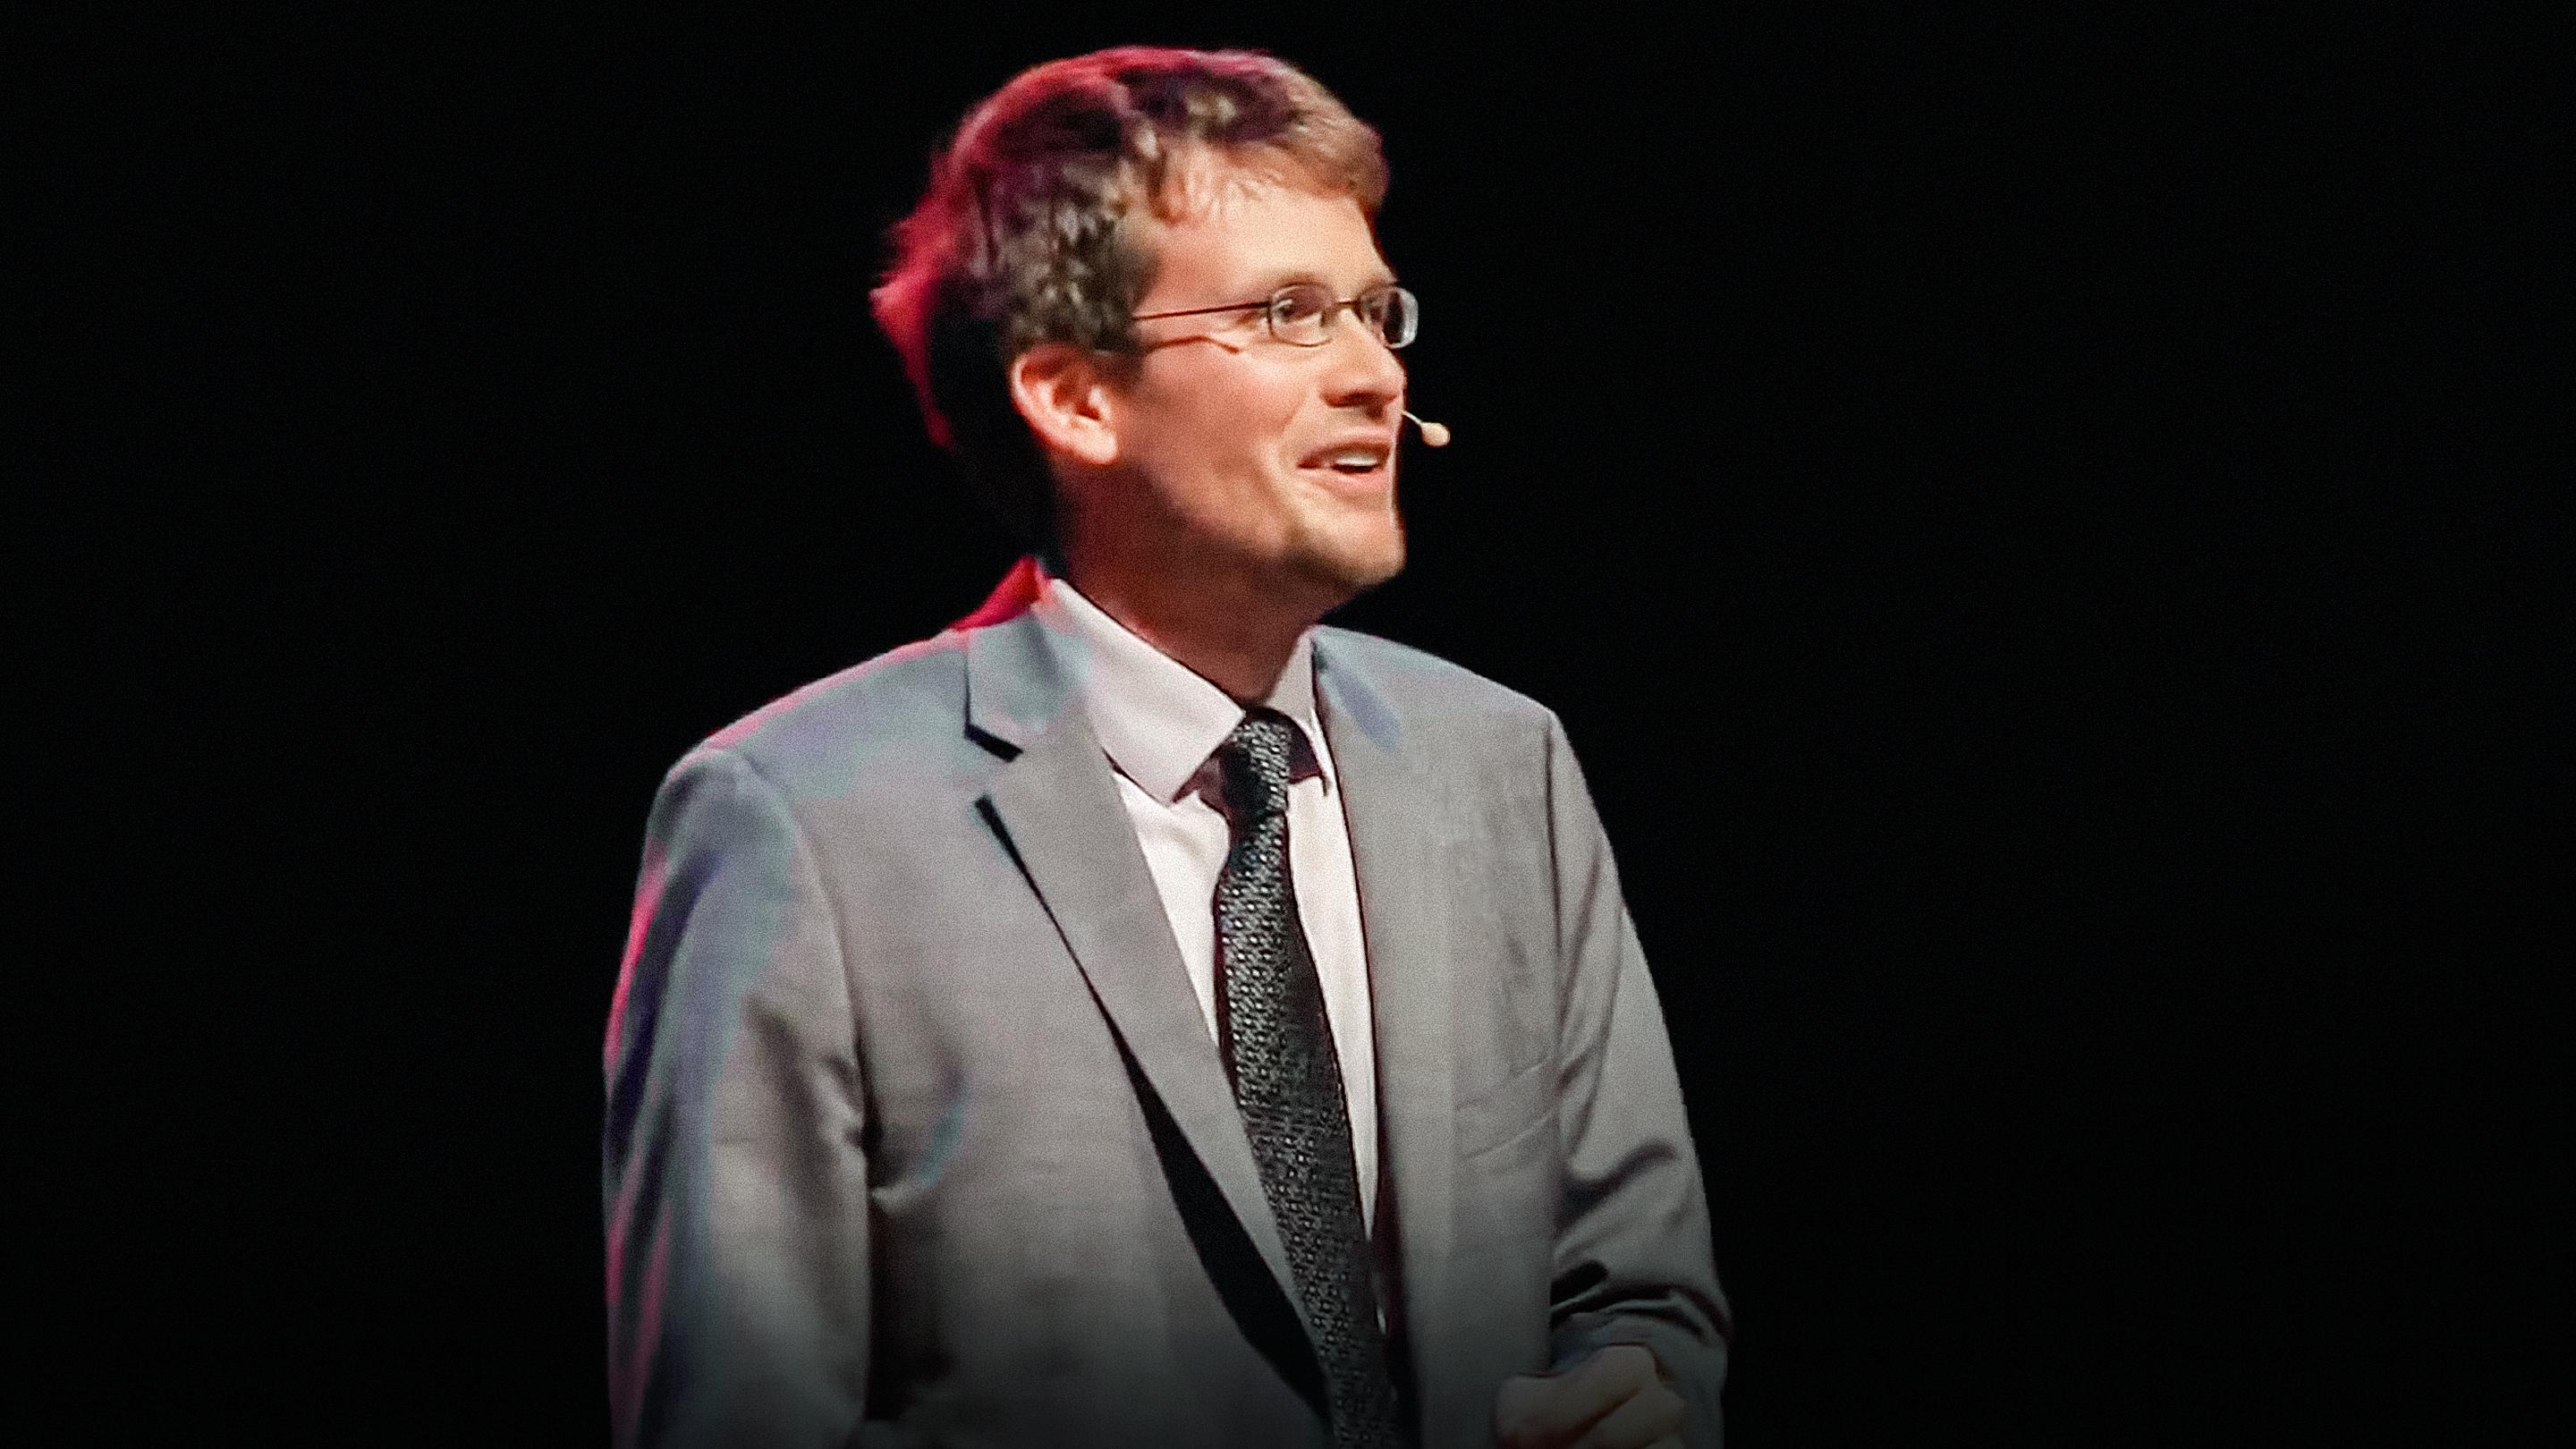 The nerd’s guide to learning everything online | John Green